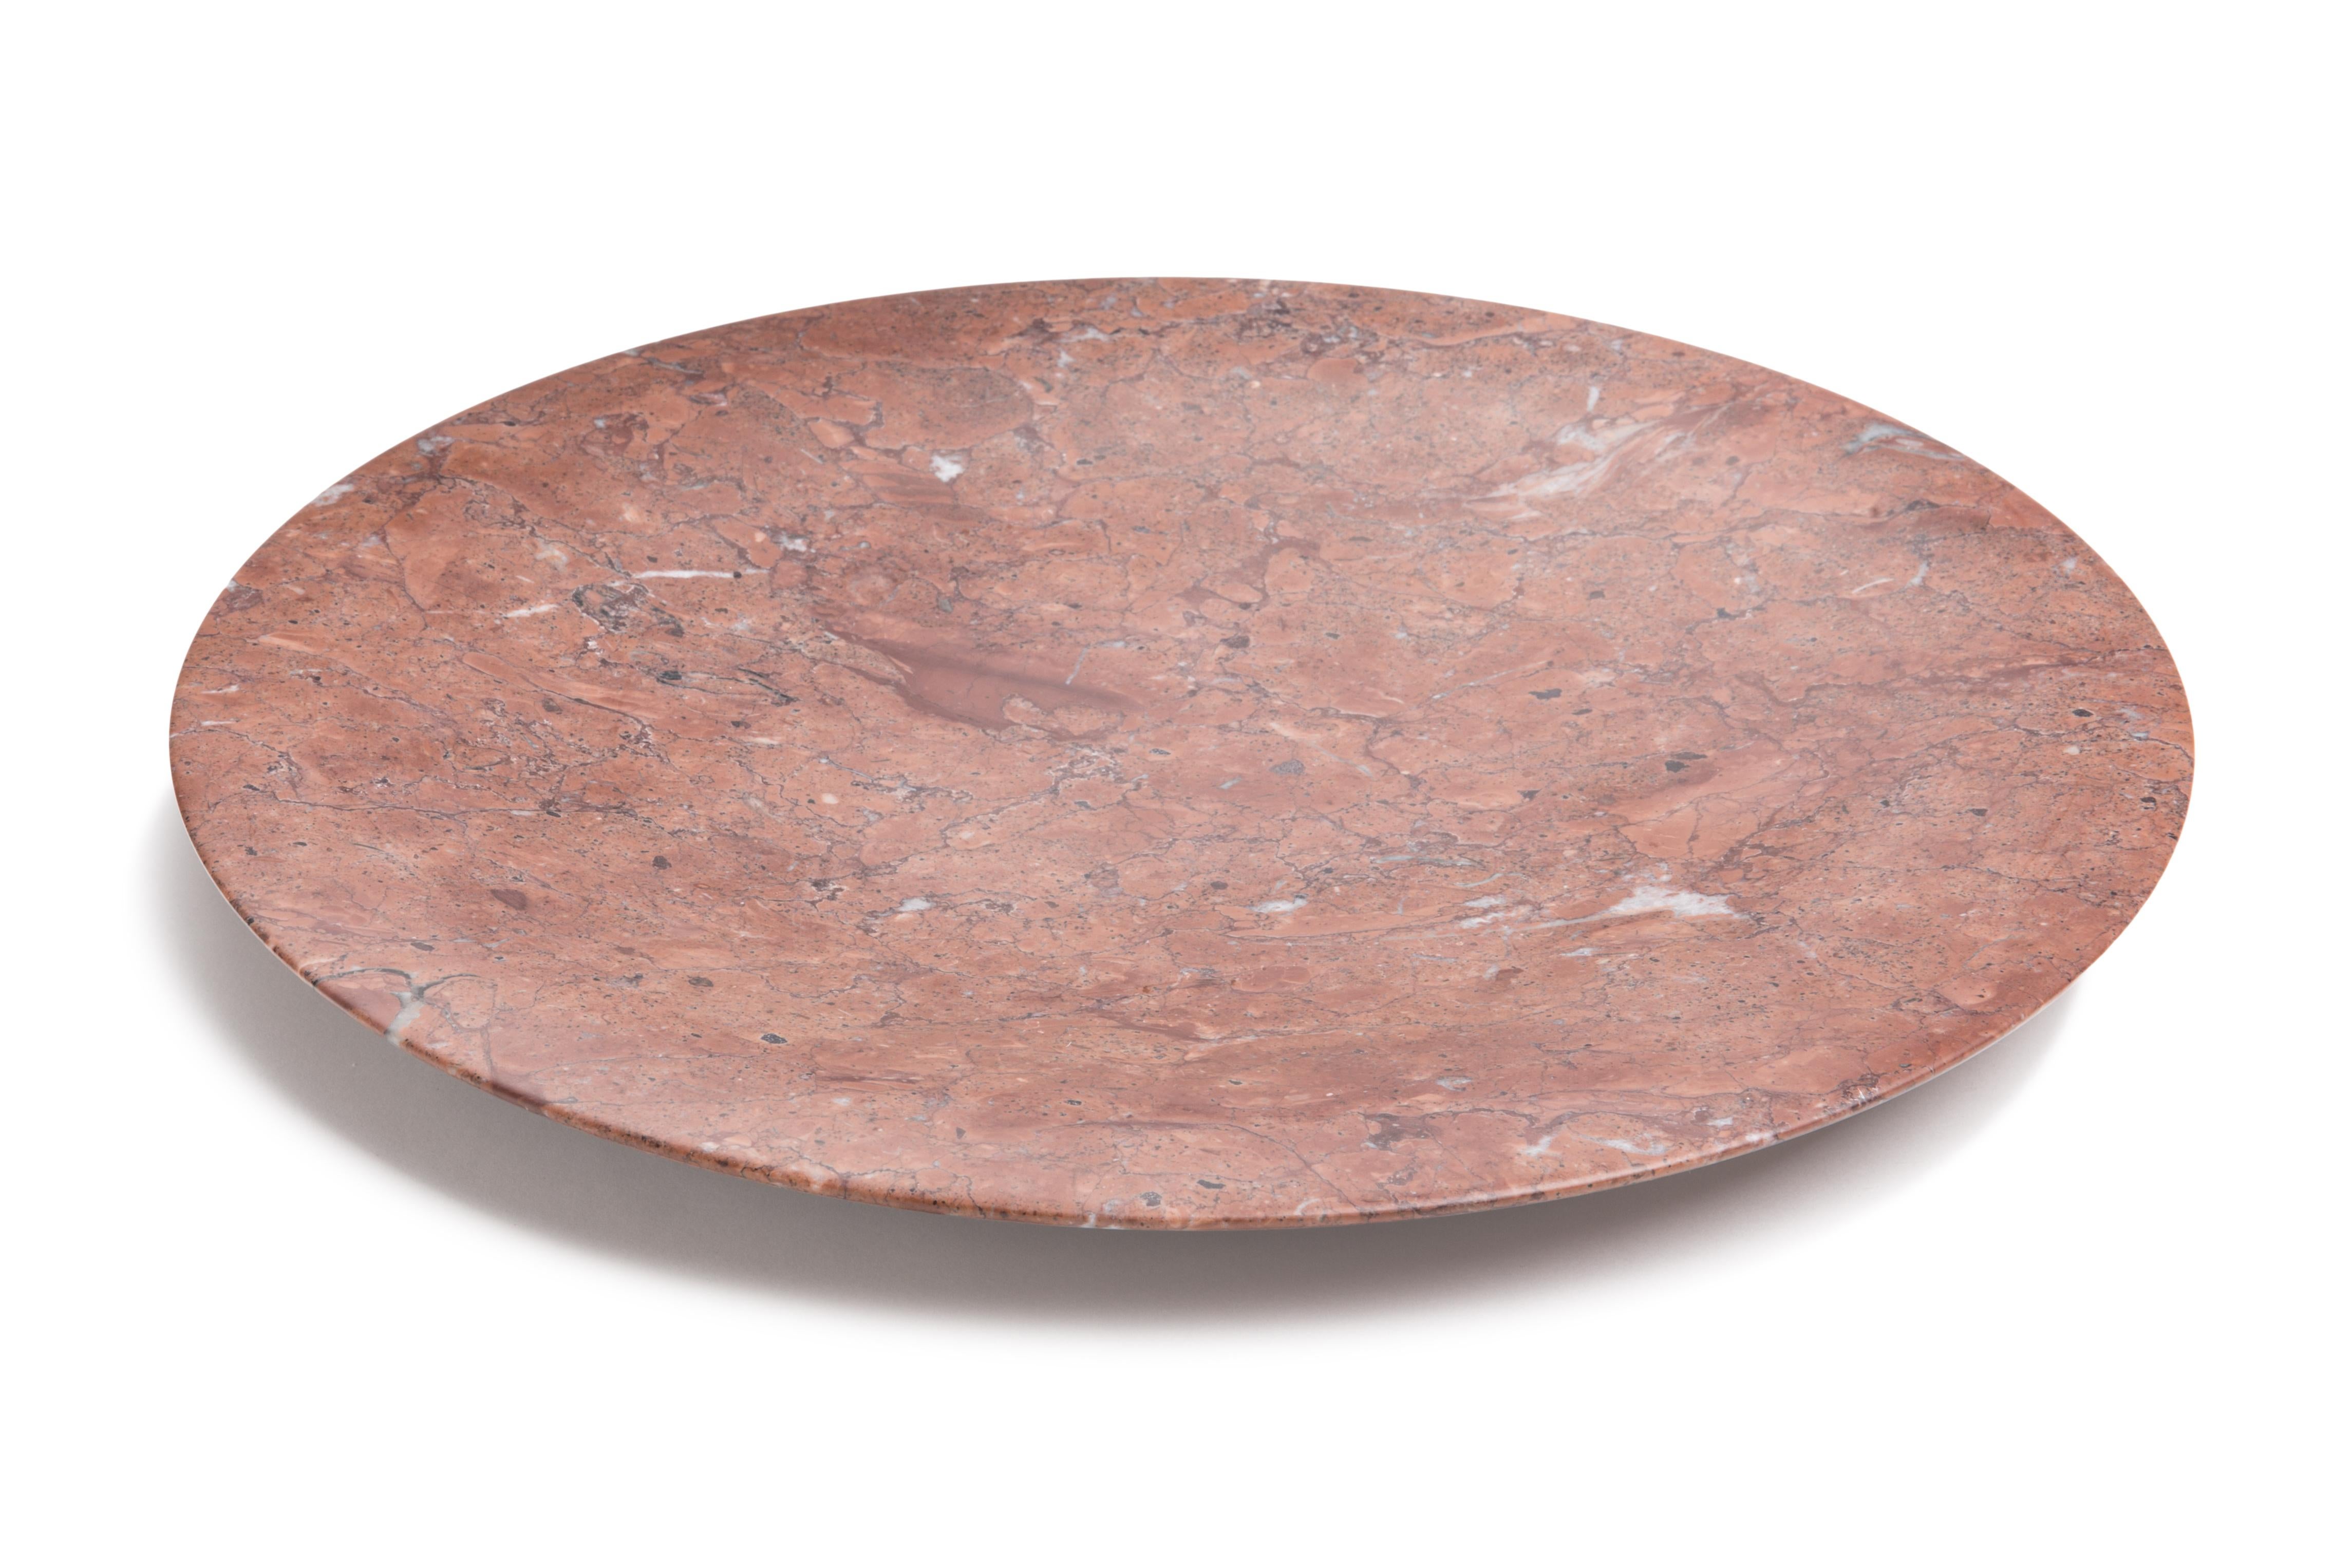 This stunning tray, made from Mexico Red marble, evokes the Renaissance concept of man being at the centre of space and nature with its circular shape. The circle is rich in symbolism in European history and art. The fusion of these two elements of